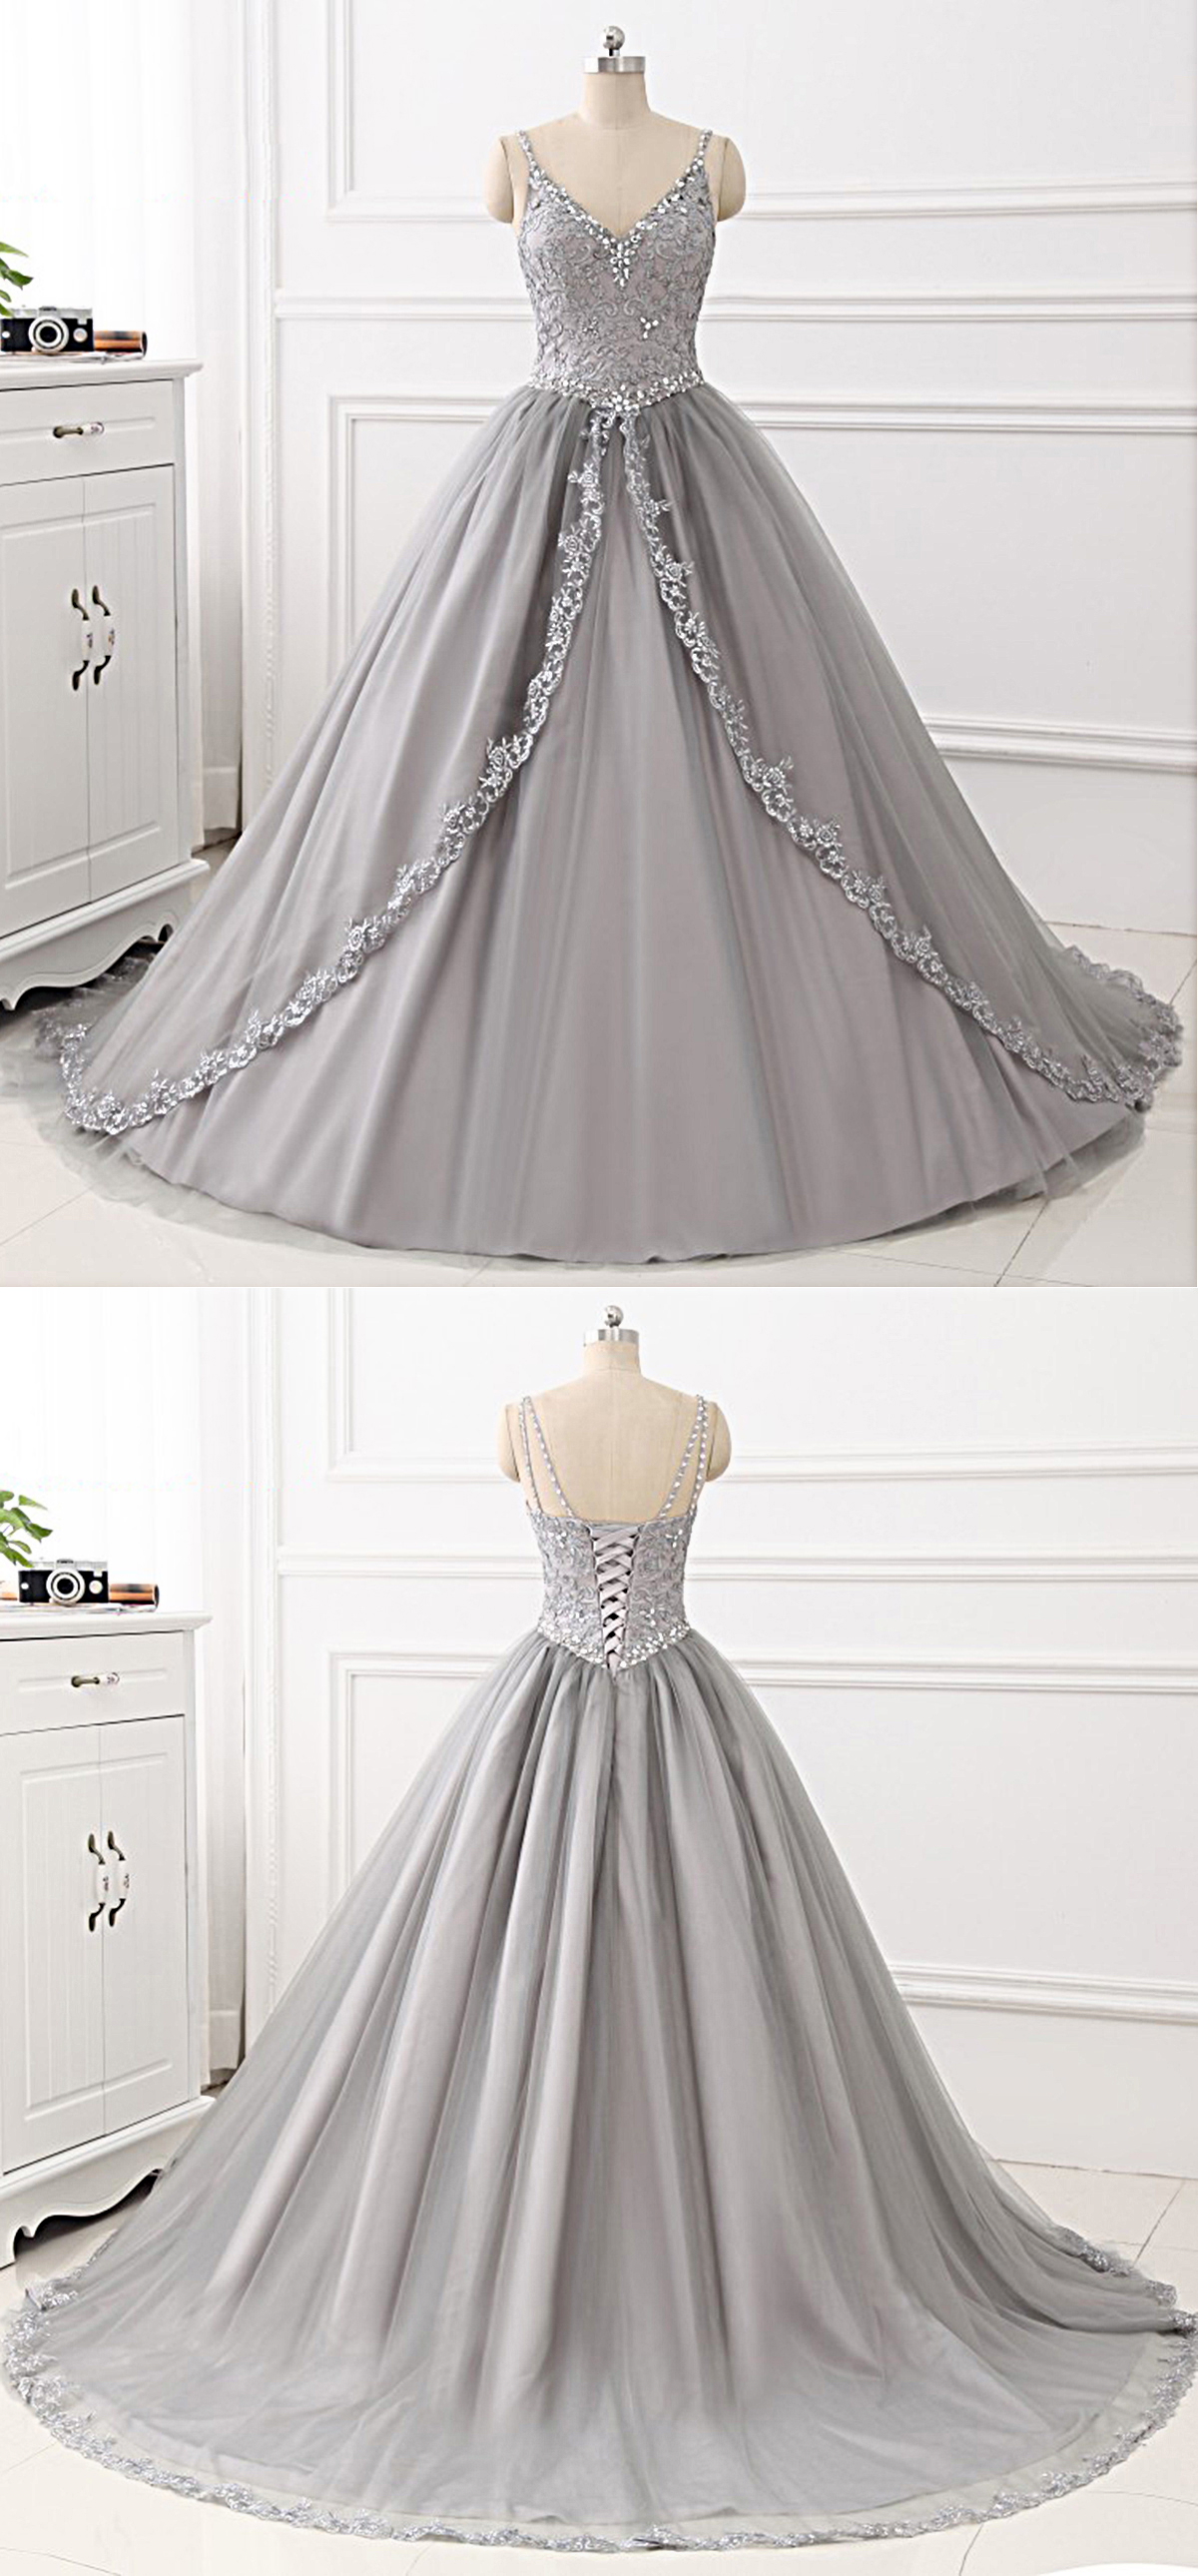 Gray Tulle Lace V Neck Spaghetti Straps Long Prom Gown, Evening Dress